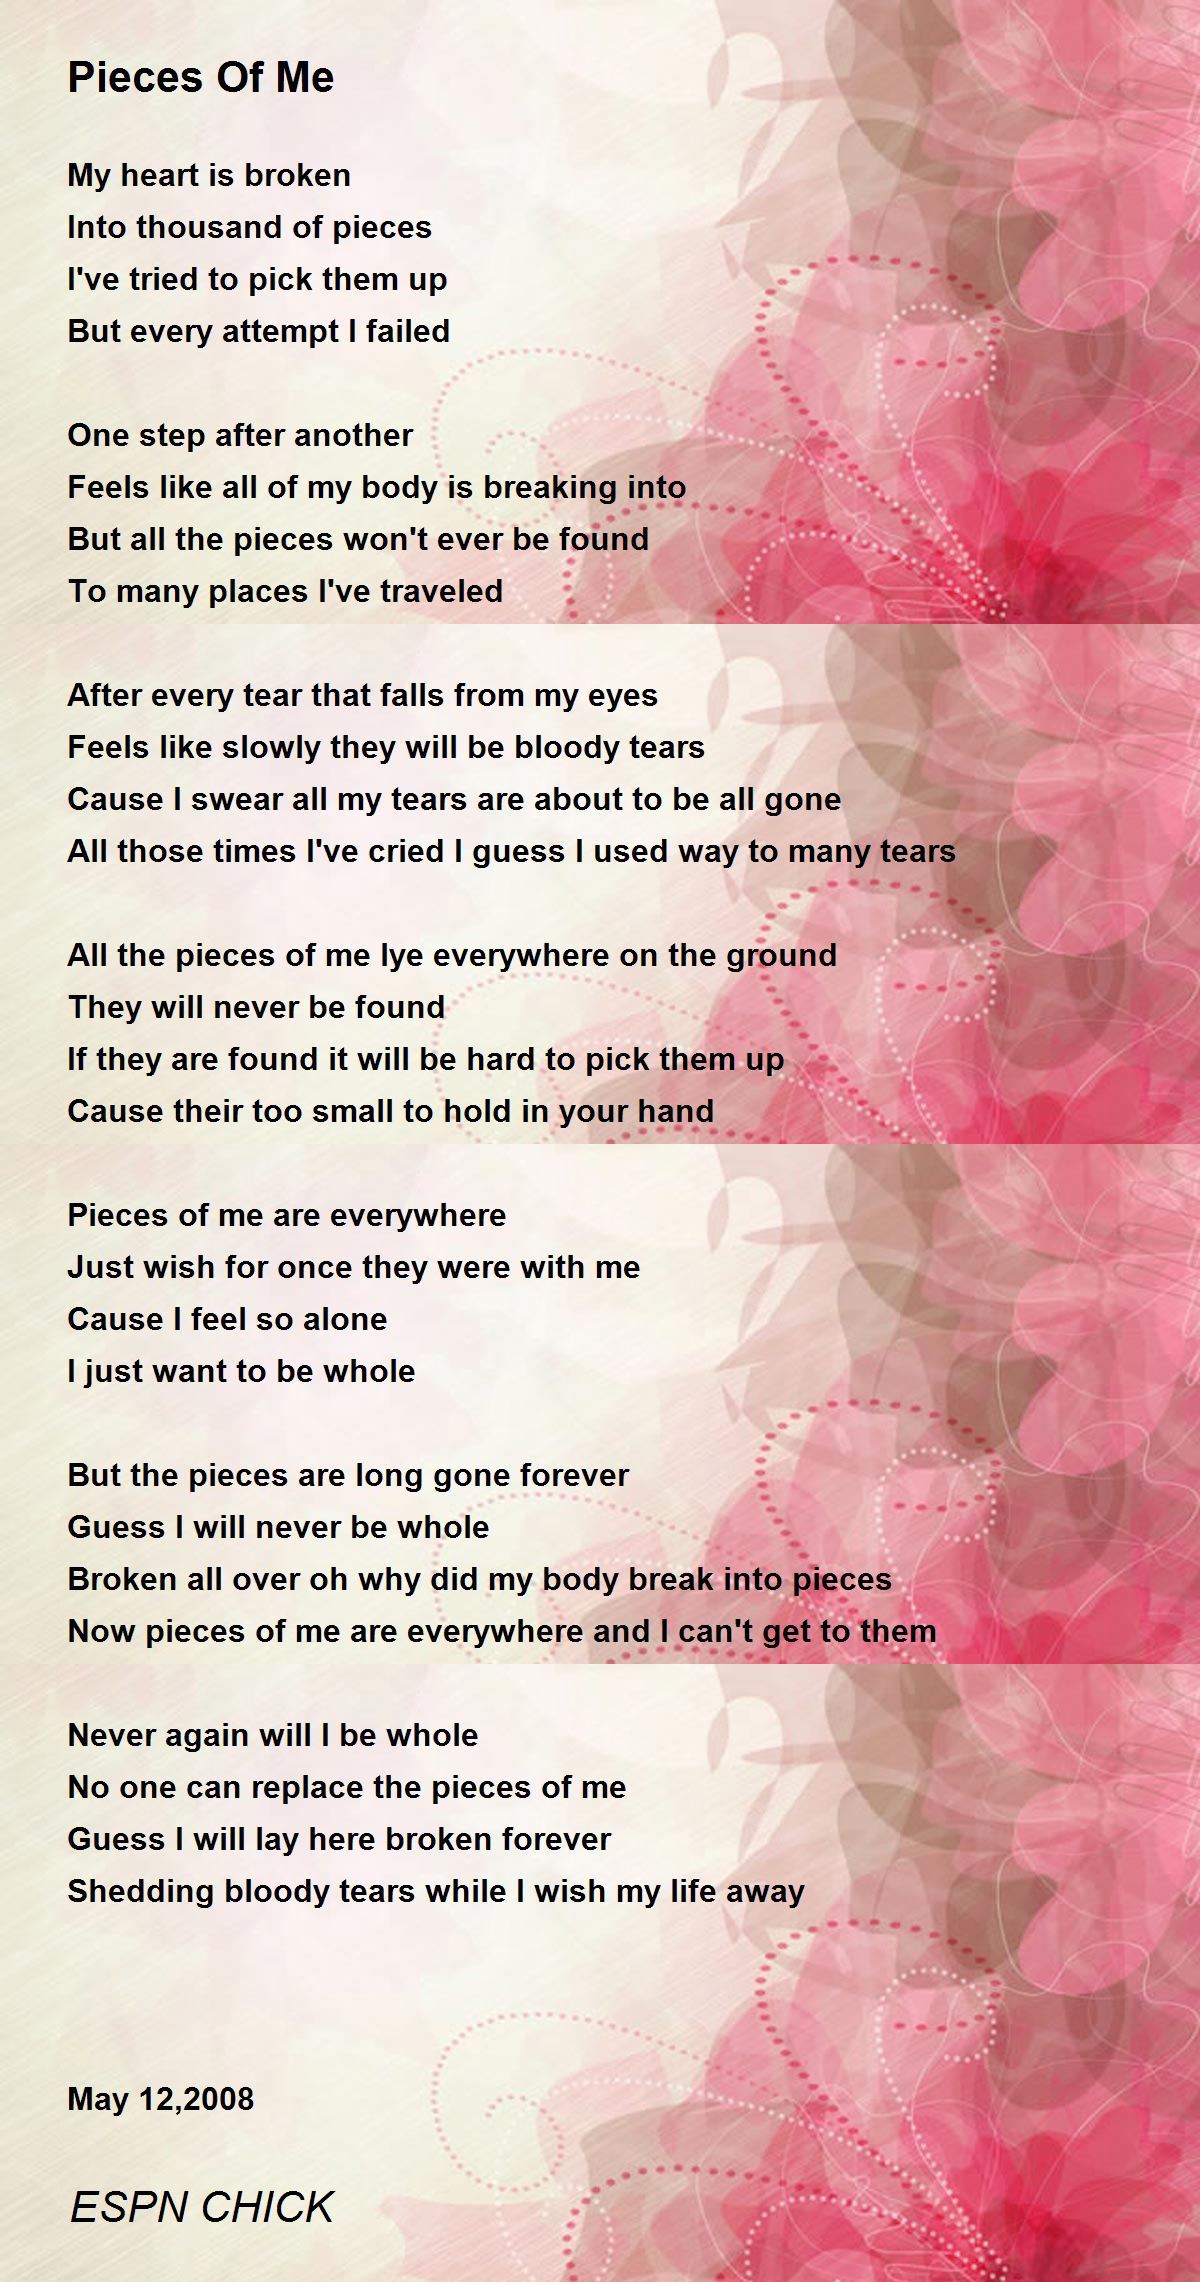 Pieces Of Me - Pieces Of Me Poem by ESPN CHICK